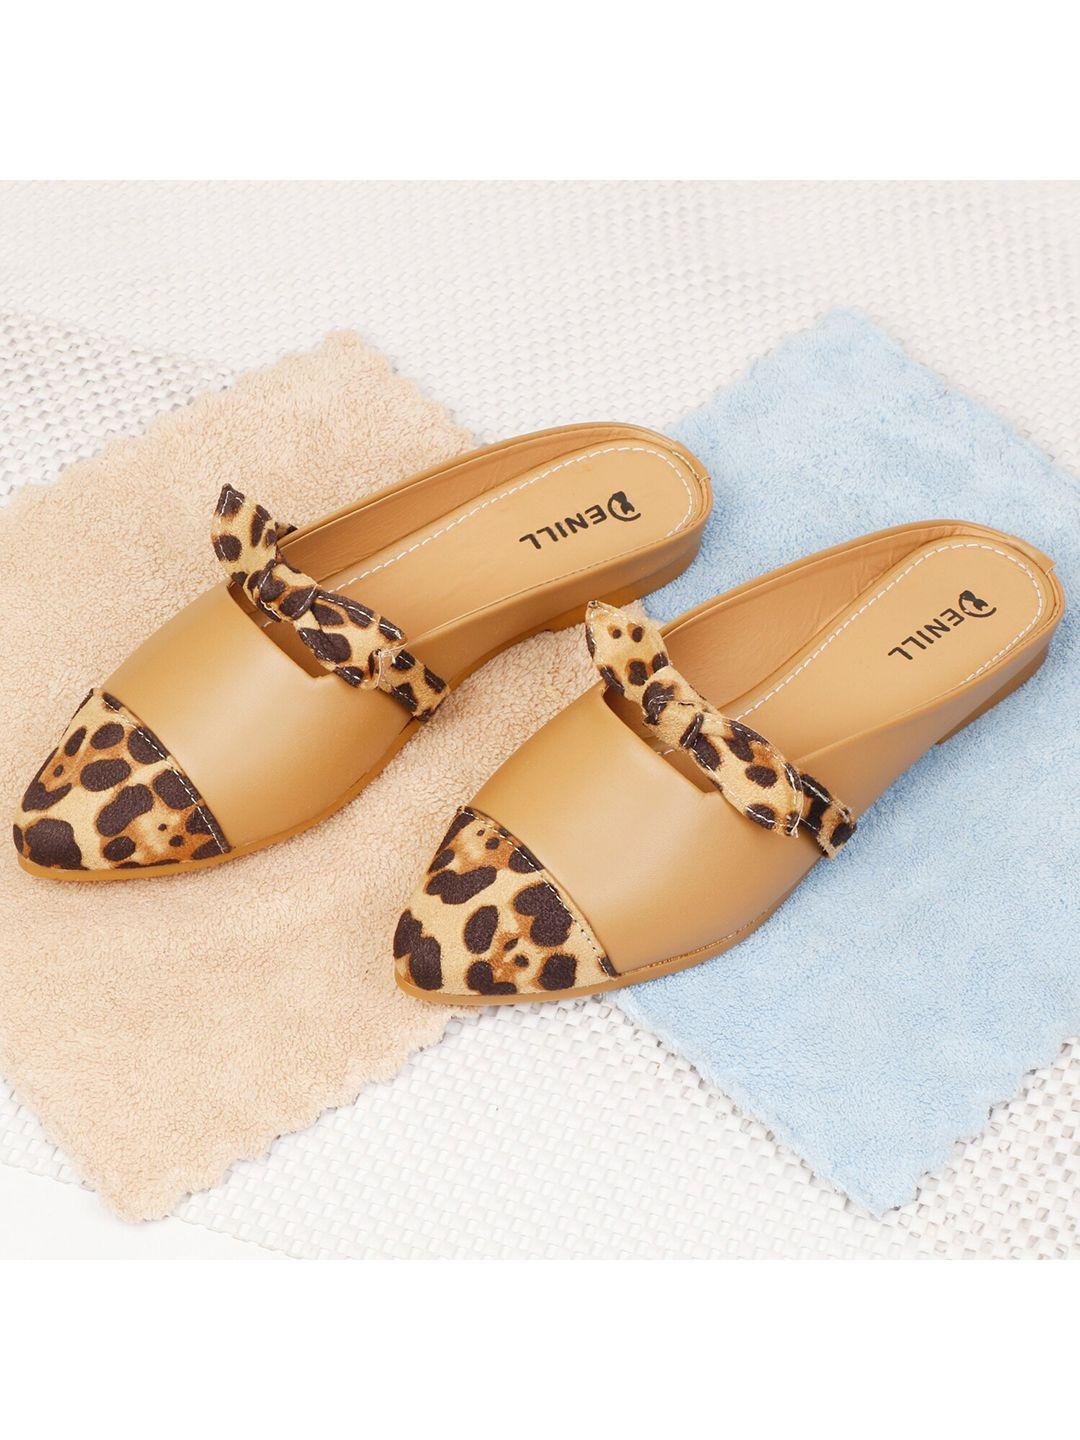 denill women beige animal print mules with bows flats